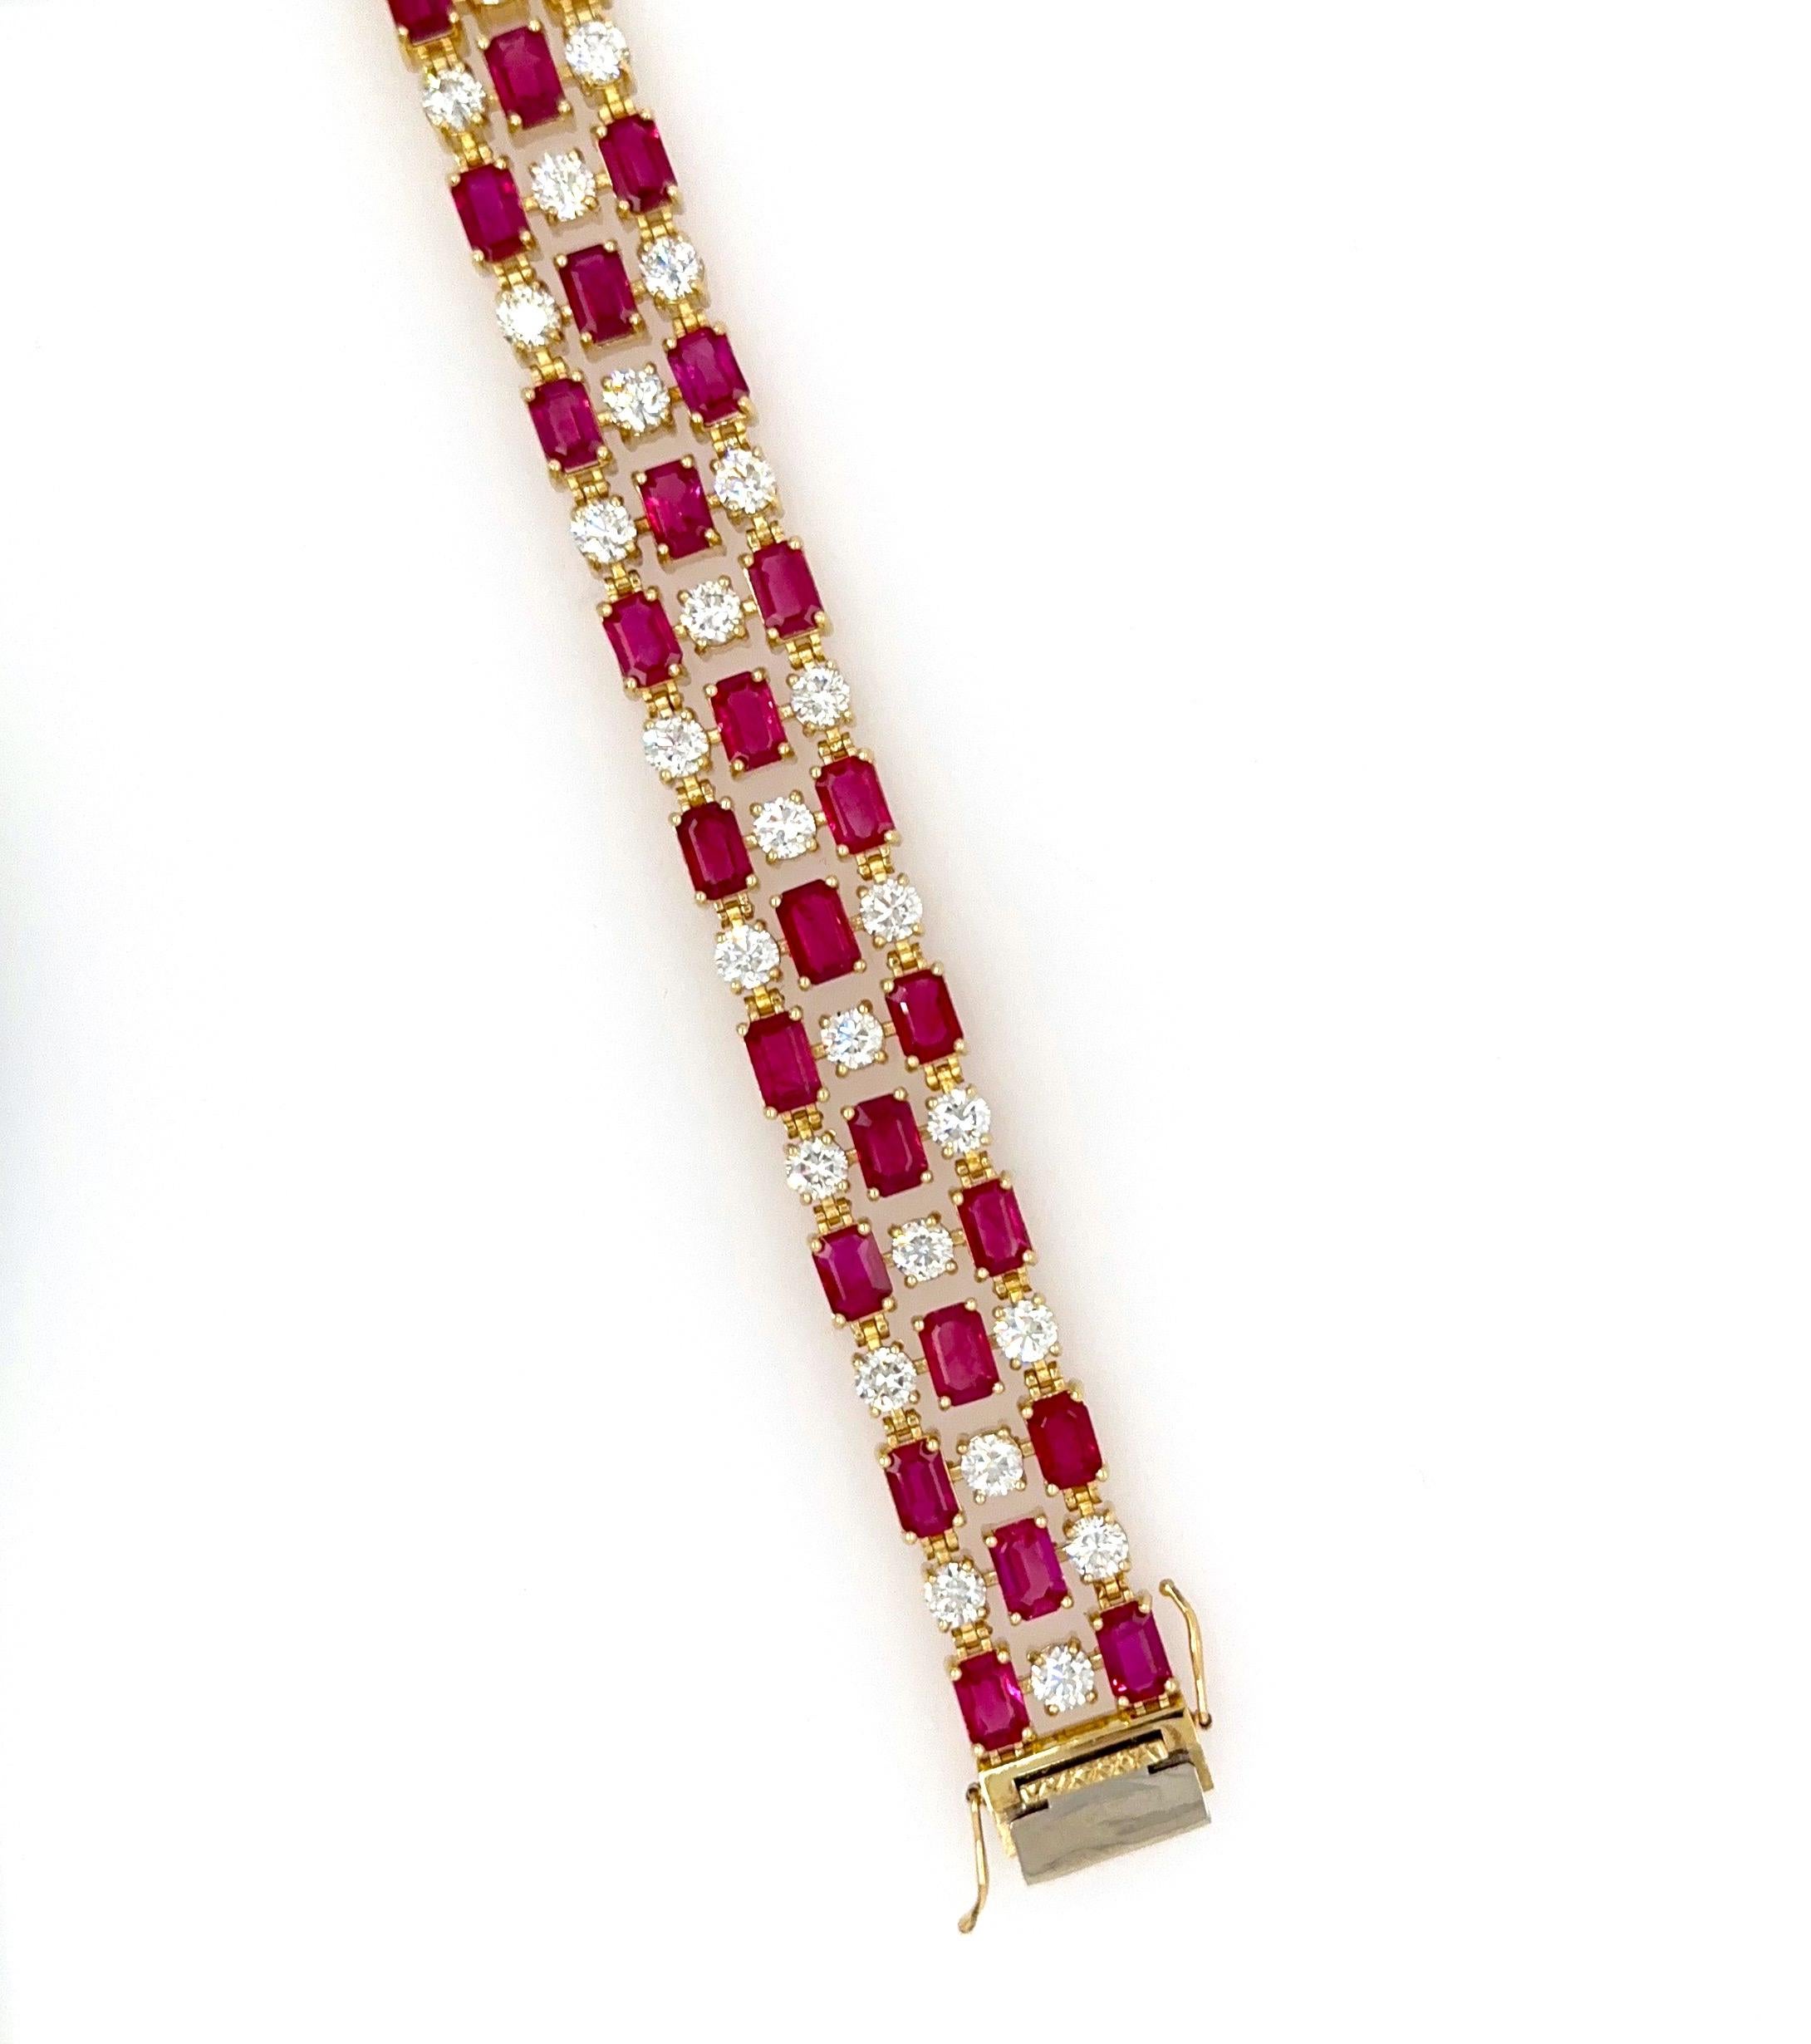 One of a kind 18k yellow gold bracelet with 19.68ctw of Emerald Cut Burma Rubies and 8.04ctw of natural white diamonds.
This beautiful bracelet is a 3 row brand new 7